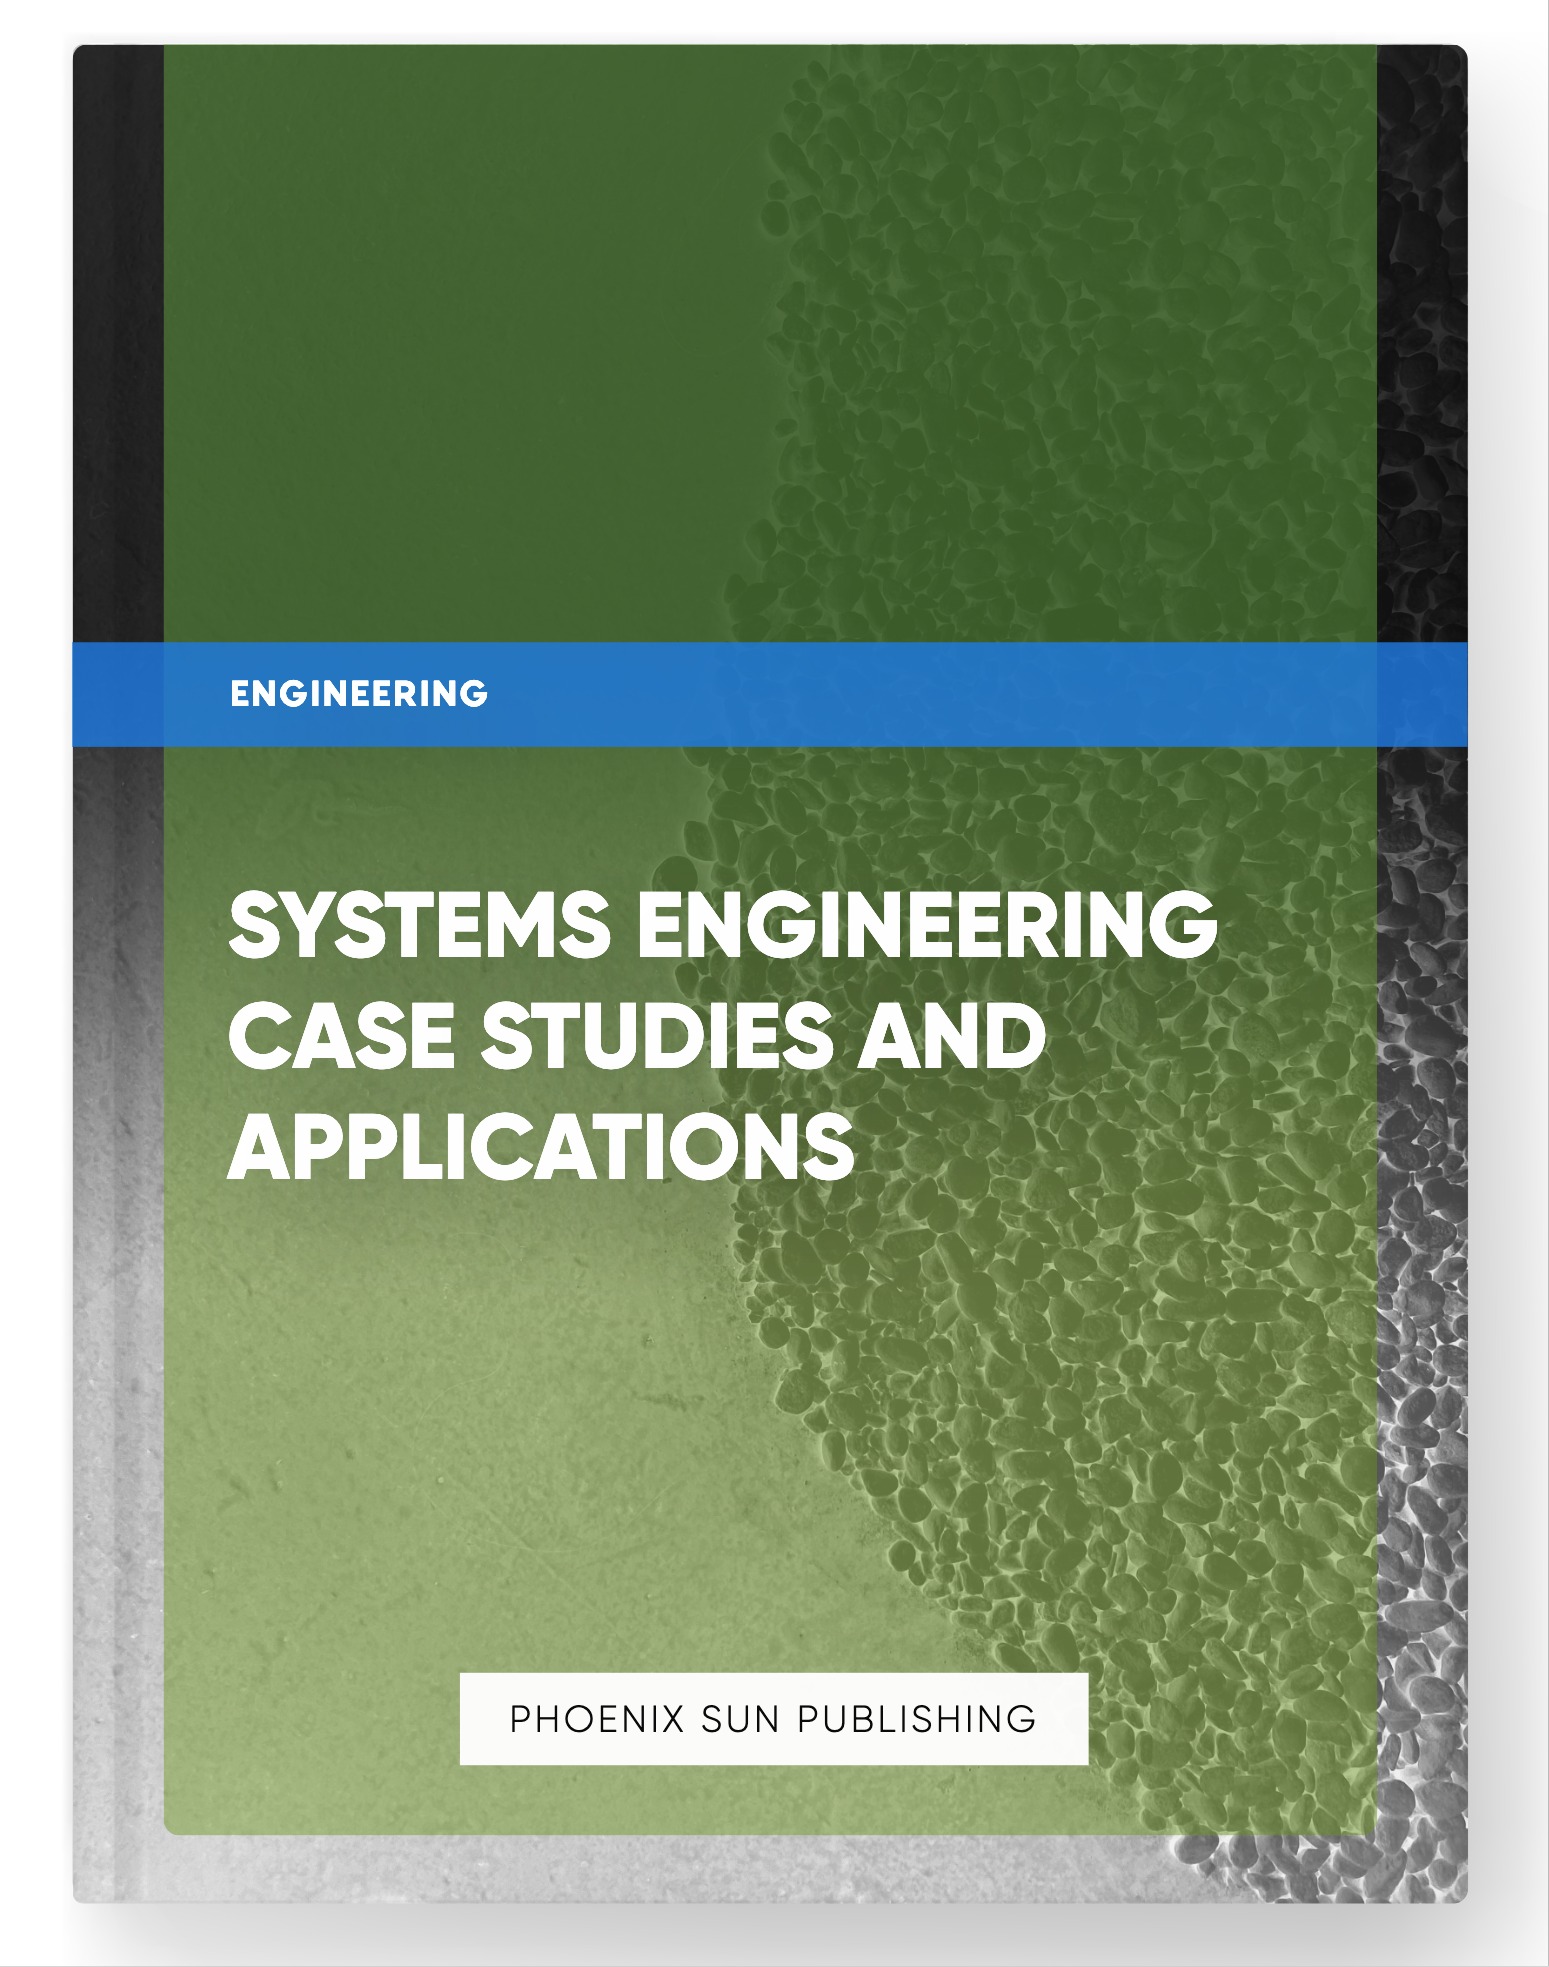 Systems Engineering Case Studies and Applications